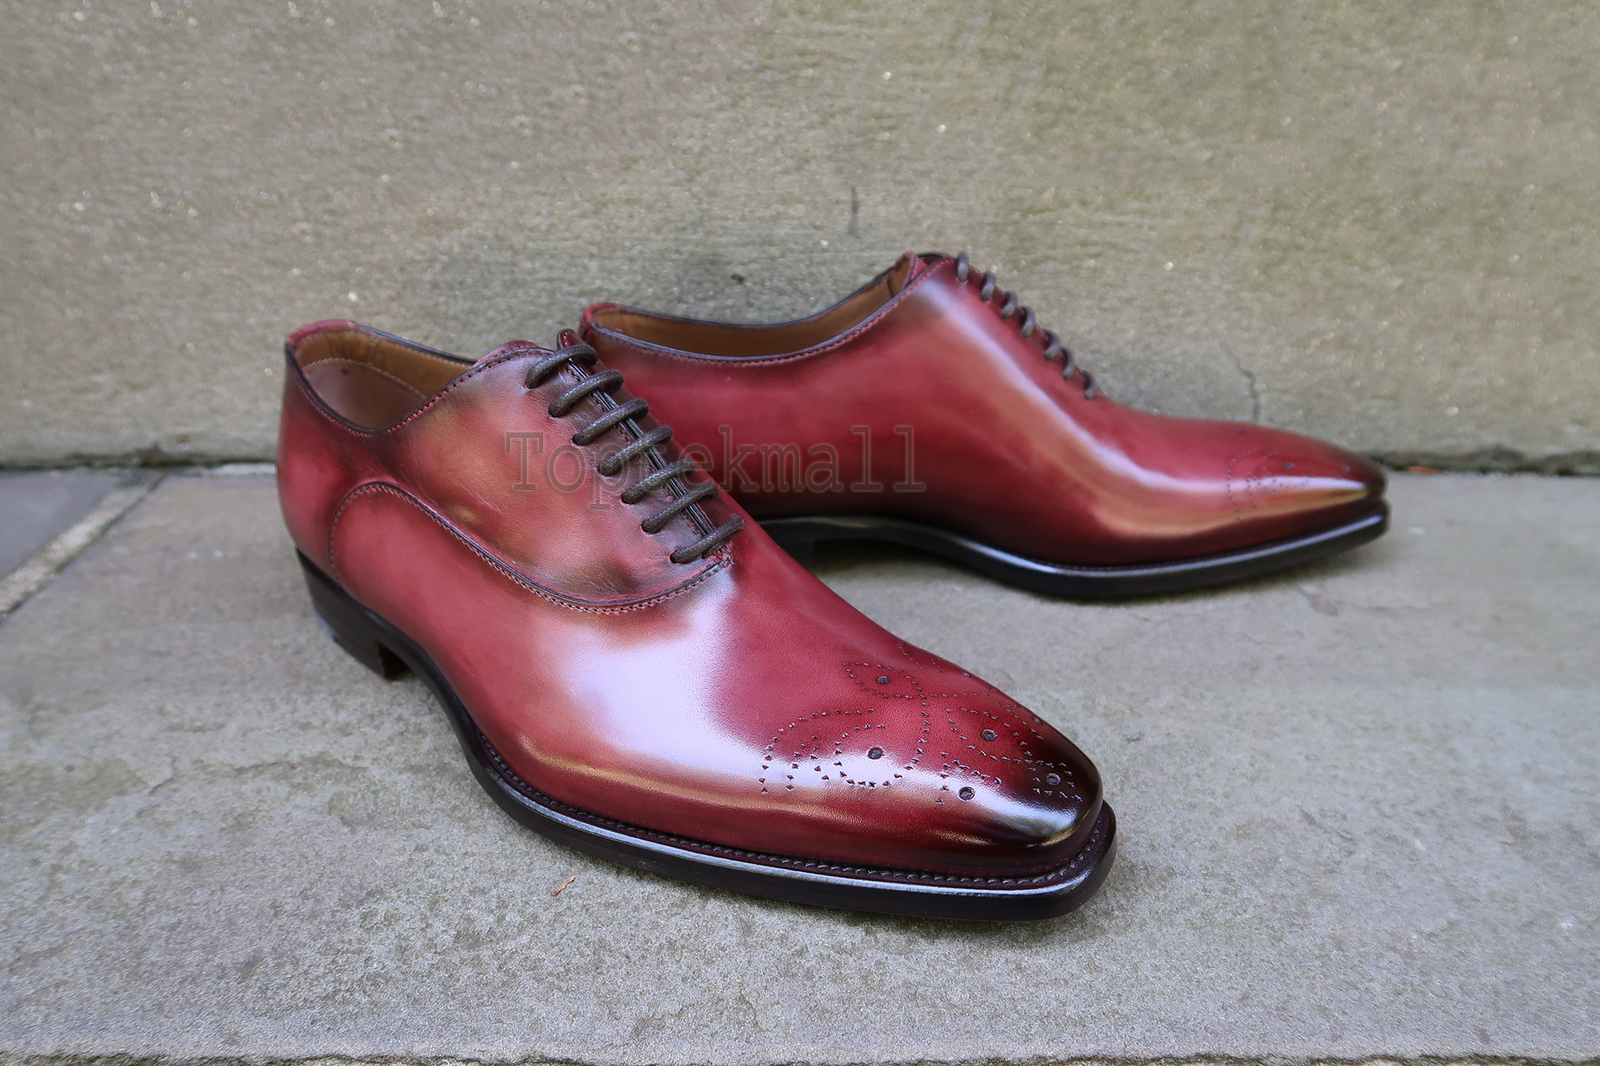 Handmade Men's Leather New two tone oxfords custom premium quality shoes-460